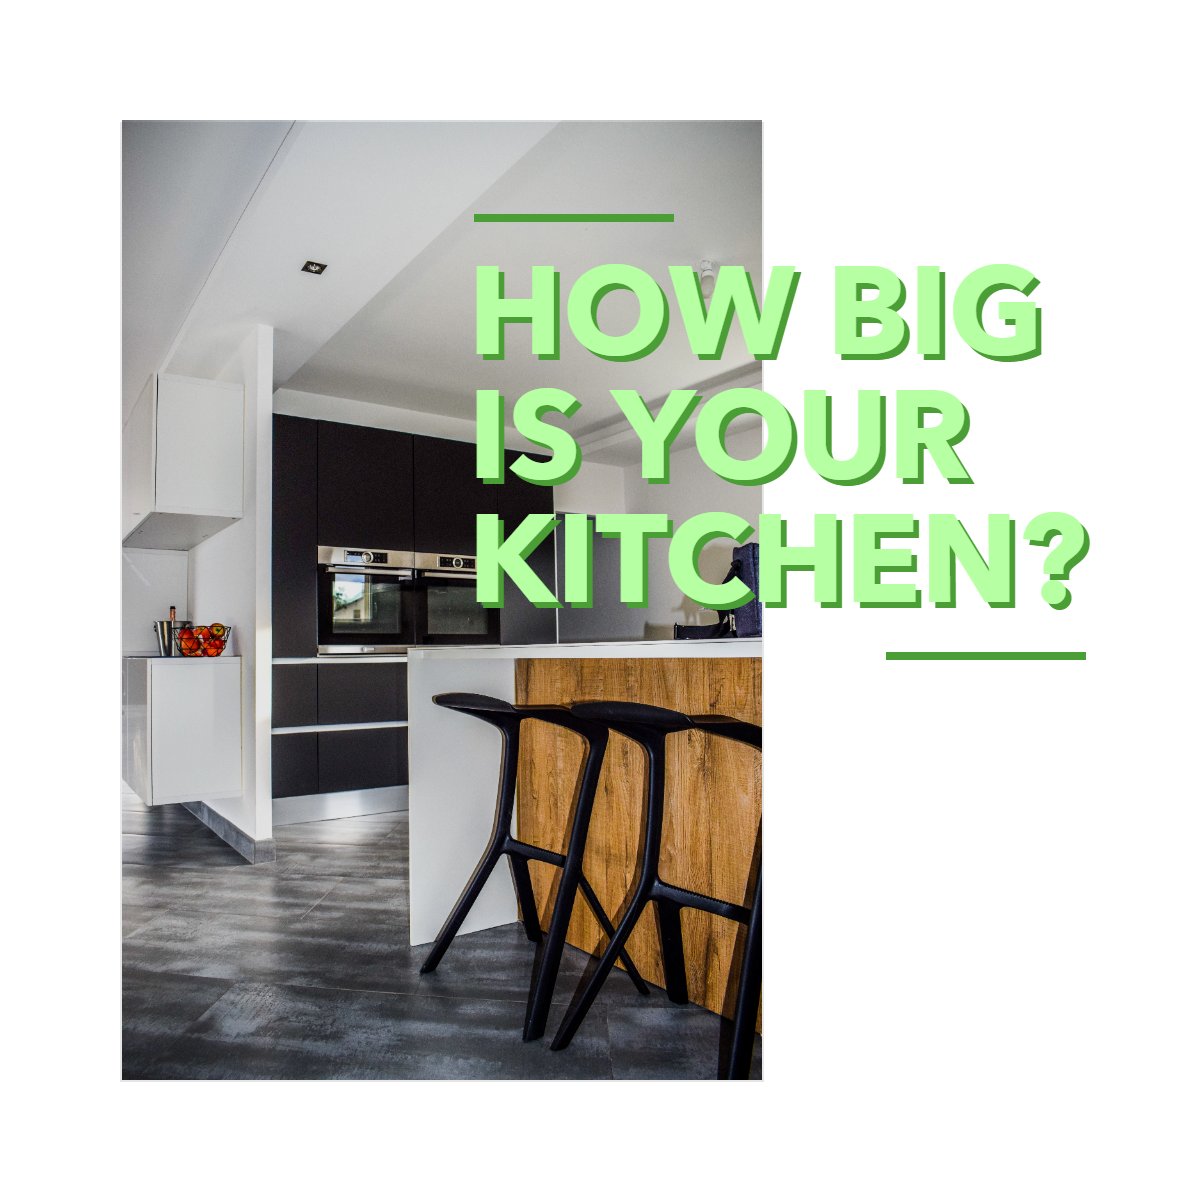 In the US, the average kitchen size for single homes is 161 square feet.

How big is your kitchen? 

#realestate   #kitchensize   #kitchen   #homes
#realestate #malden #wakefield #melrose #medford #stoneham #93north